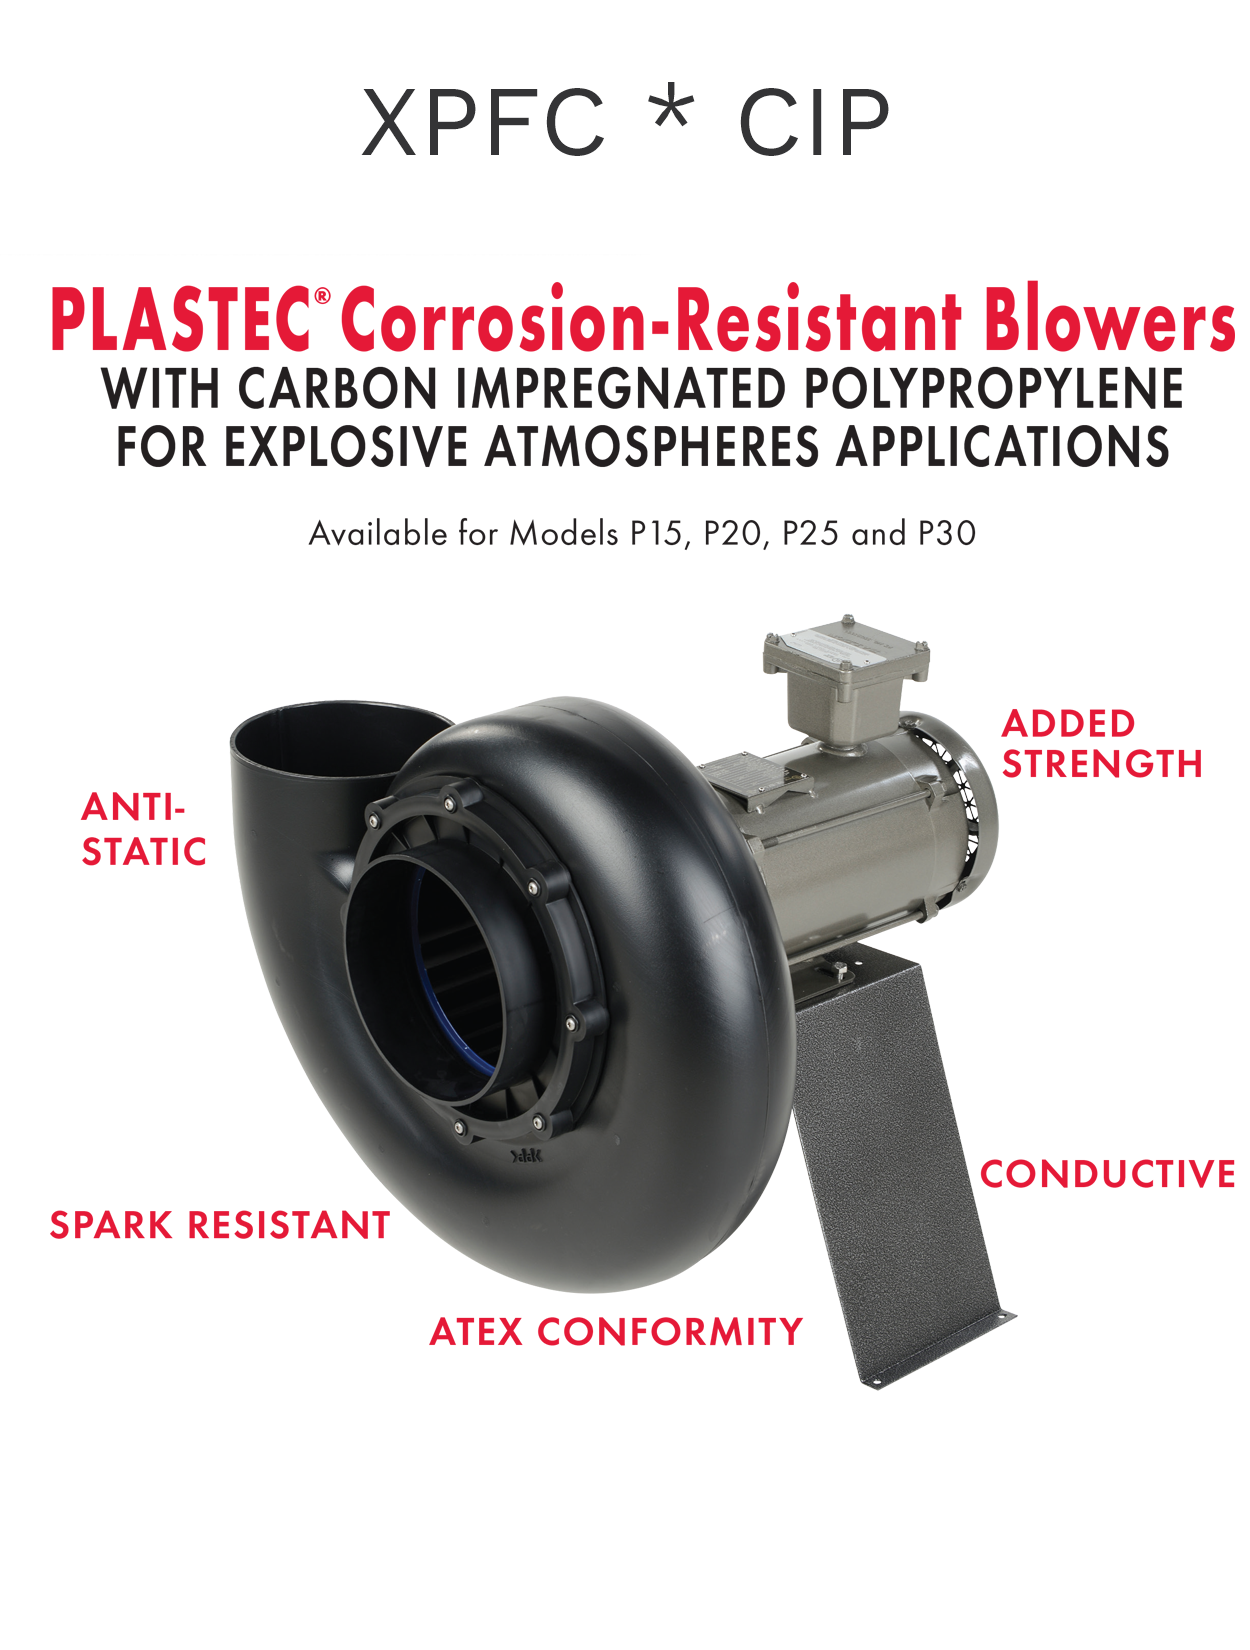 Plastec 20 Direct Drive Forward Curve Polypropylene Blower available in explosion-proof option made with Carbon Impregnated Polypropylene